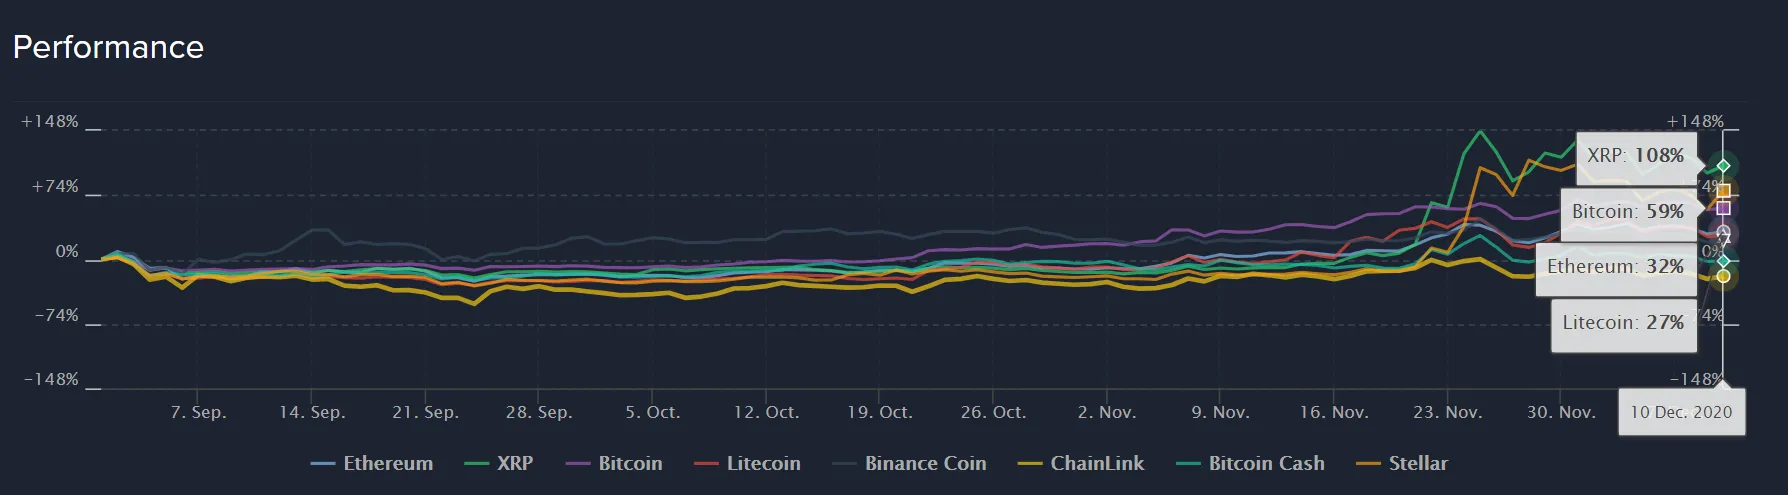 Performance of XRP against other cryptocurrencies before the snapshot